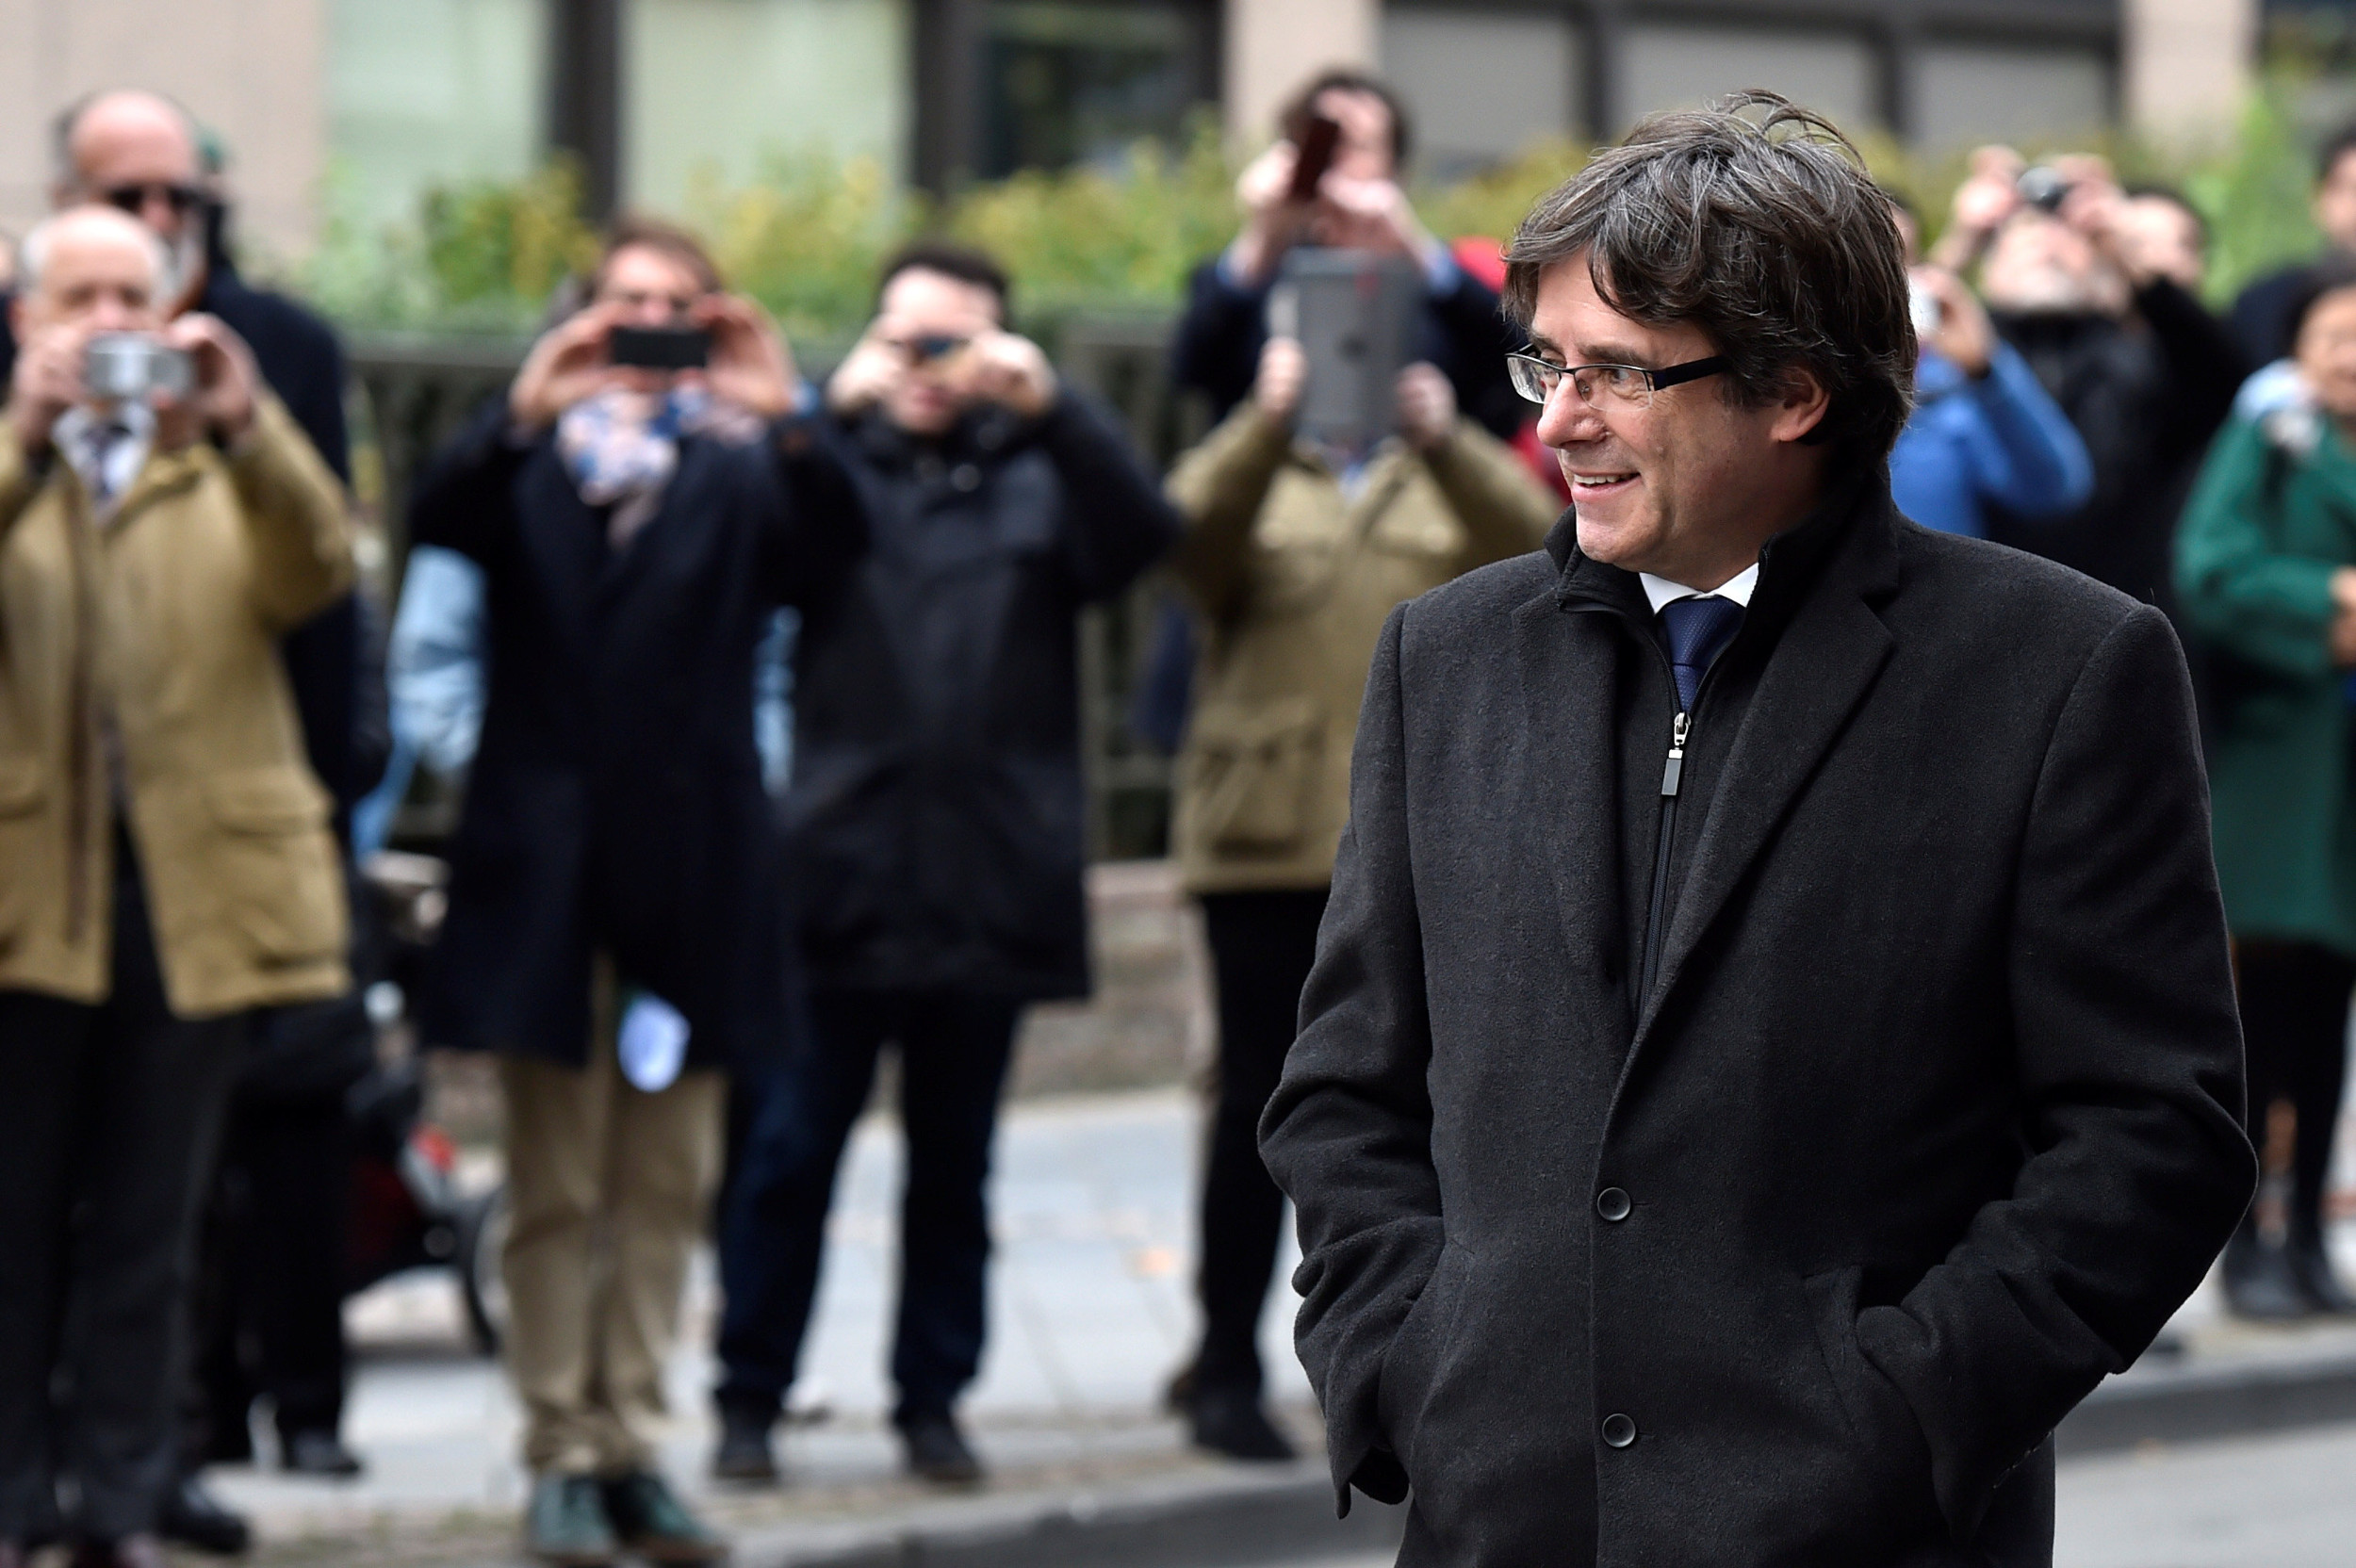 Carles Puigdemont arriving at press conference in Brussels Oct 31 (by ACN)